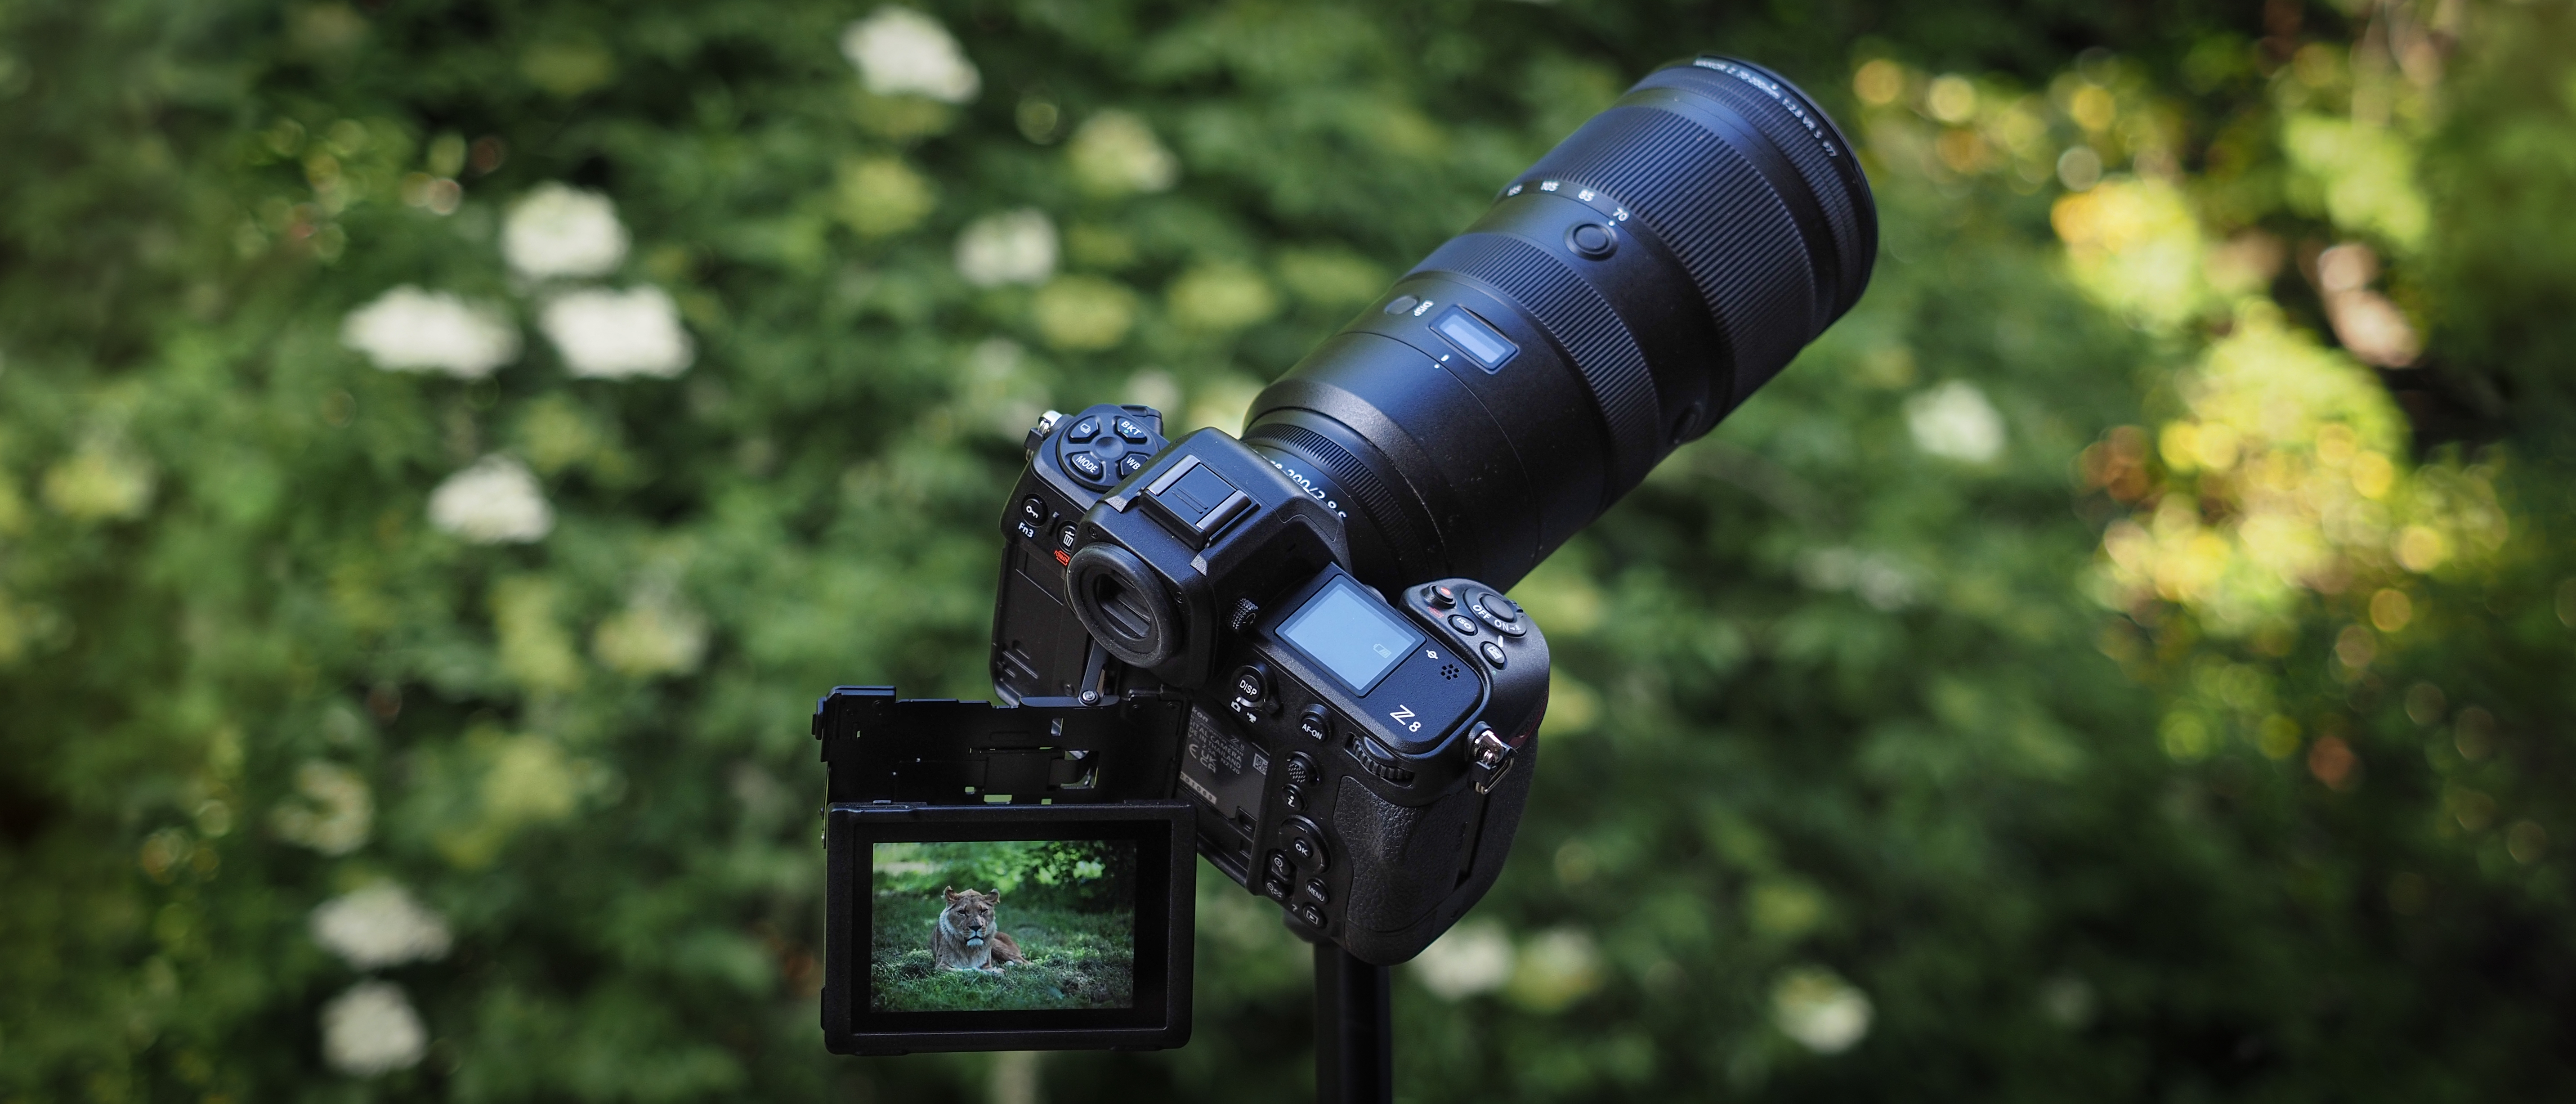 Nikon Z9 review: Speed, resolution and 8K video power